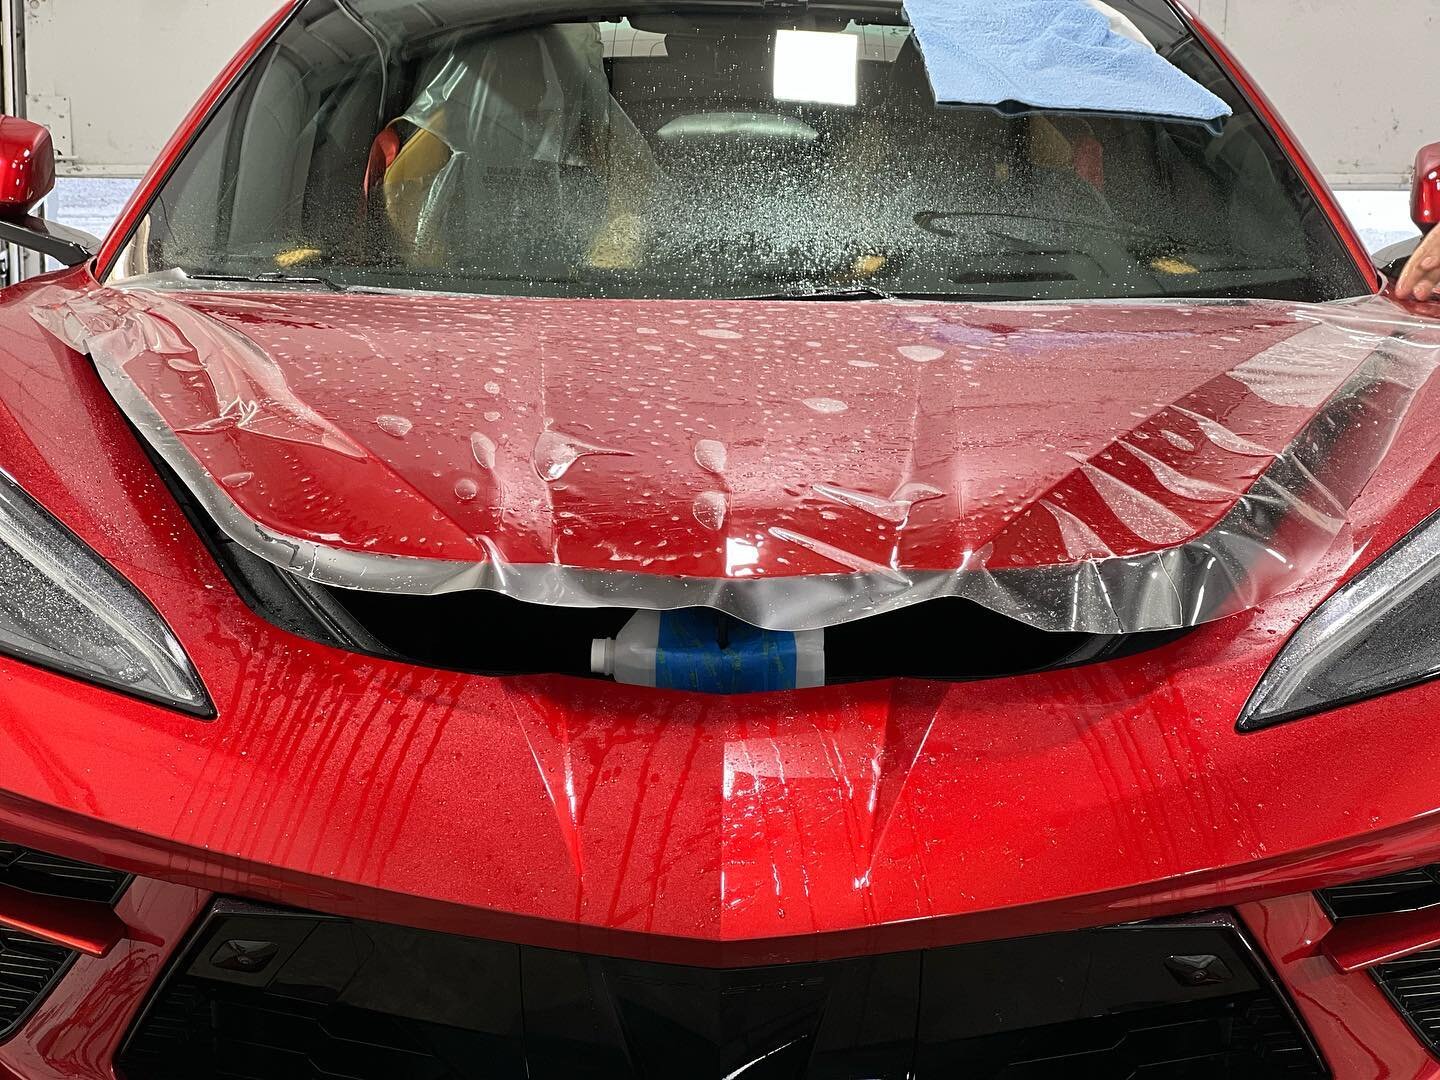 C8 Corvette - Full car wrap with Xpel Ultimate Plus paint protection film. Best way to protect your paint from stone chips and scratches. 

Contact us to have your vehicle protected. Located in Woburn, MA. 

#corvette #c8corvette #xpel #boston #bosto